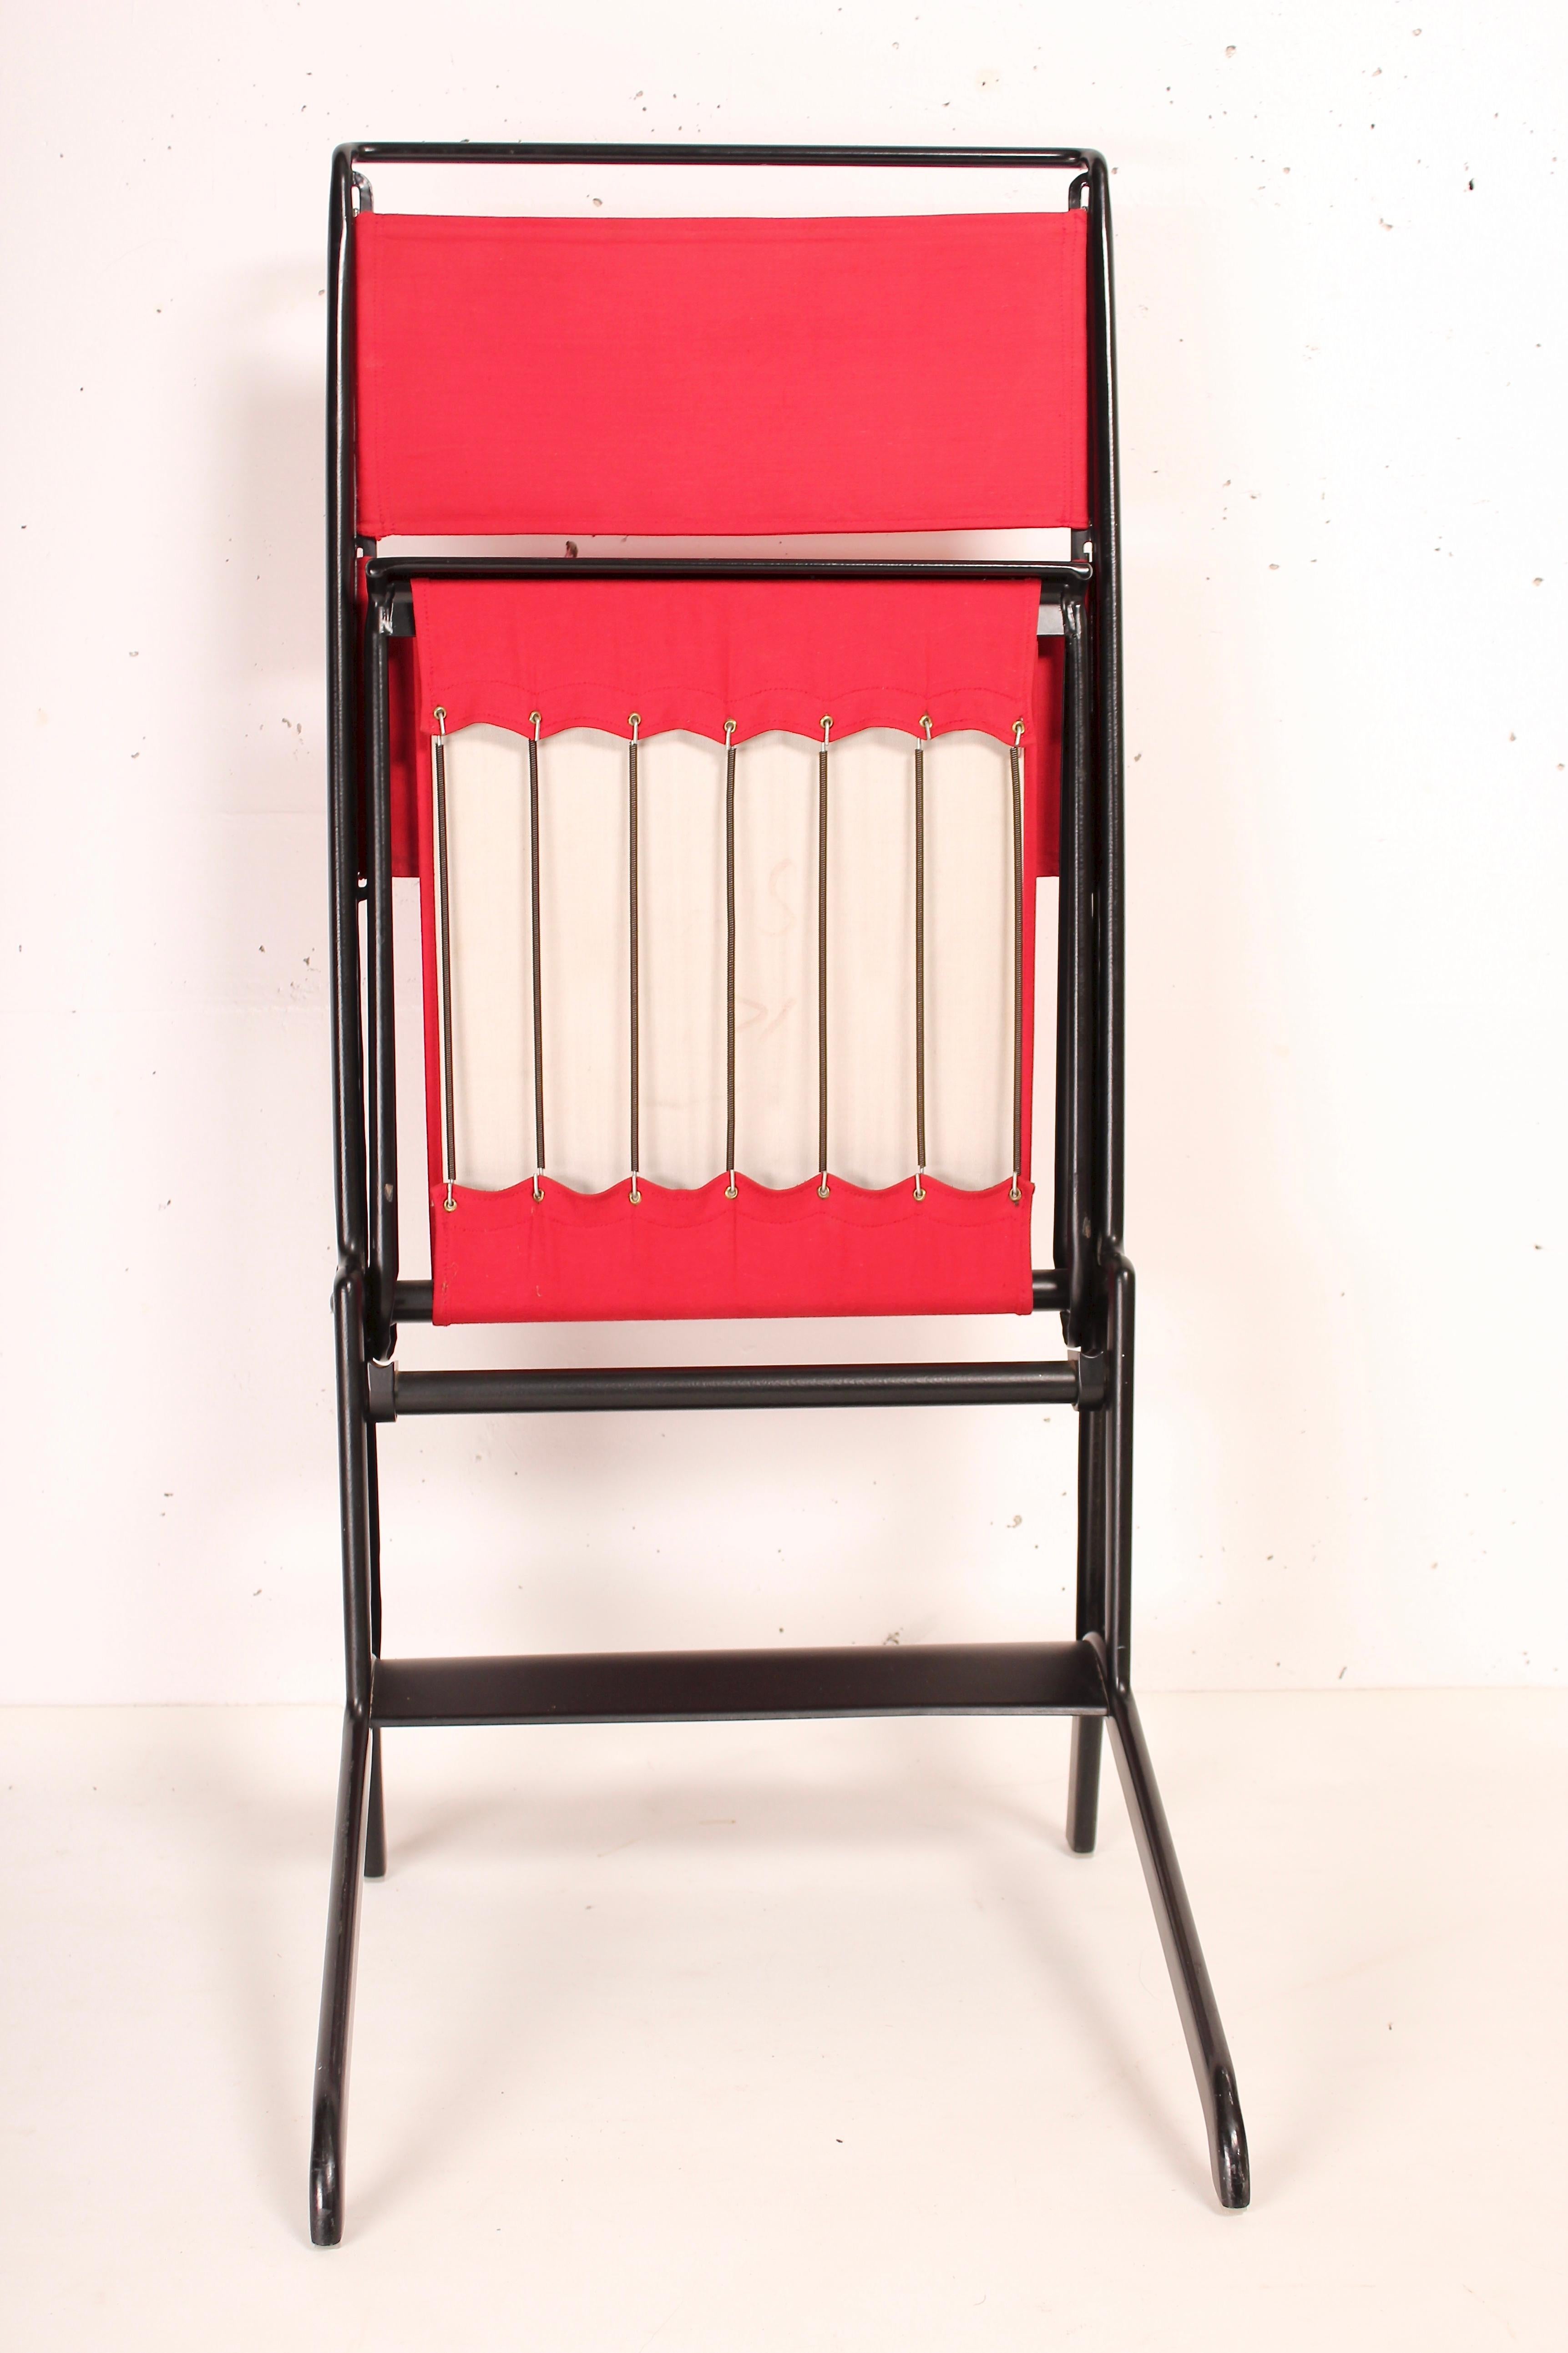 Jean Prouvé Folding Chair Designed 1930, Manufactured by Tecta, 1983 For Sale 1